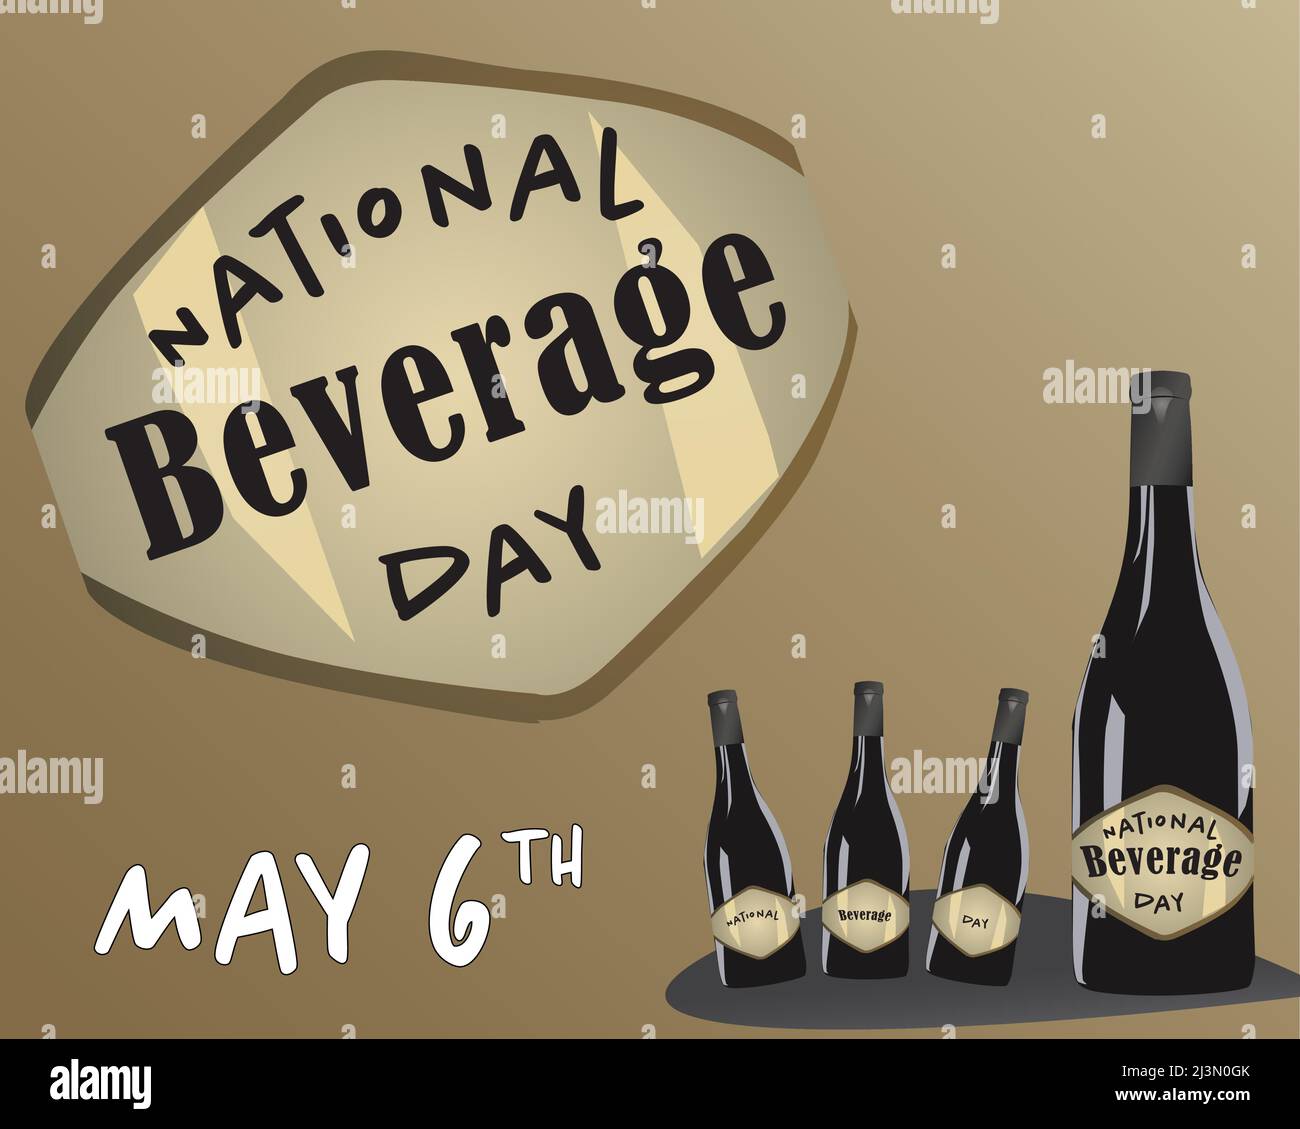 Banner Or Poster Vector Illustration Design For National Beverage Day May 6th Stock Vector